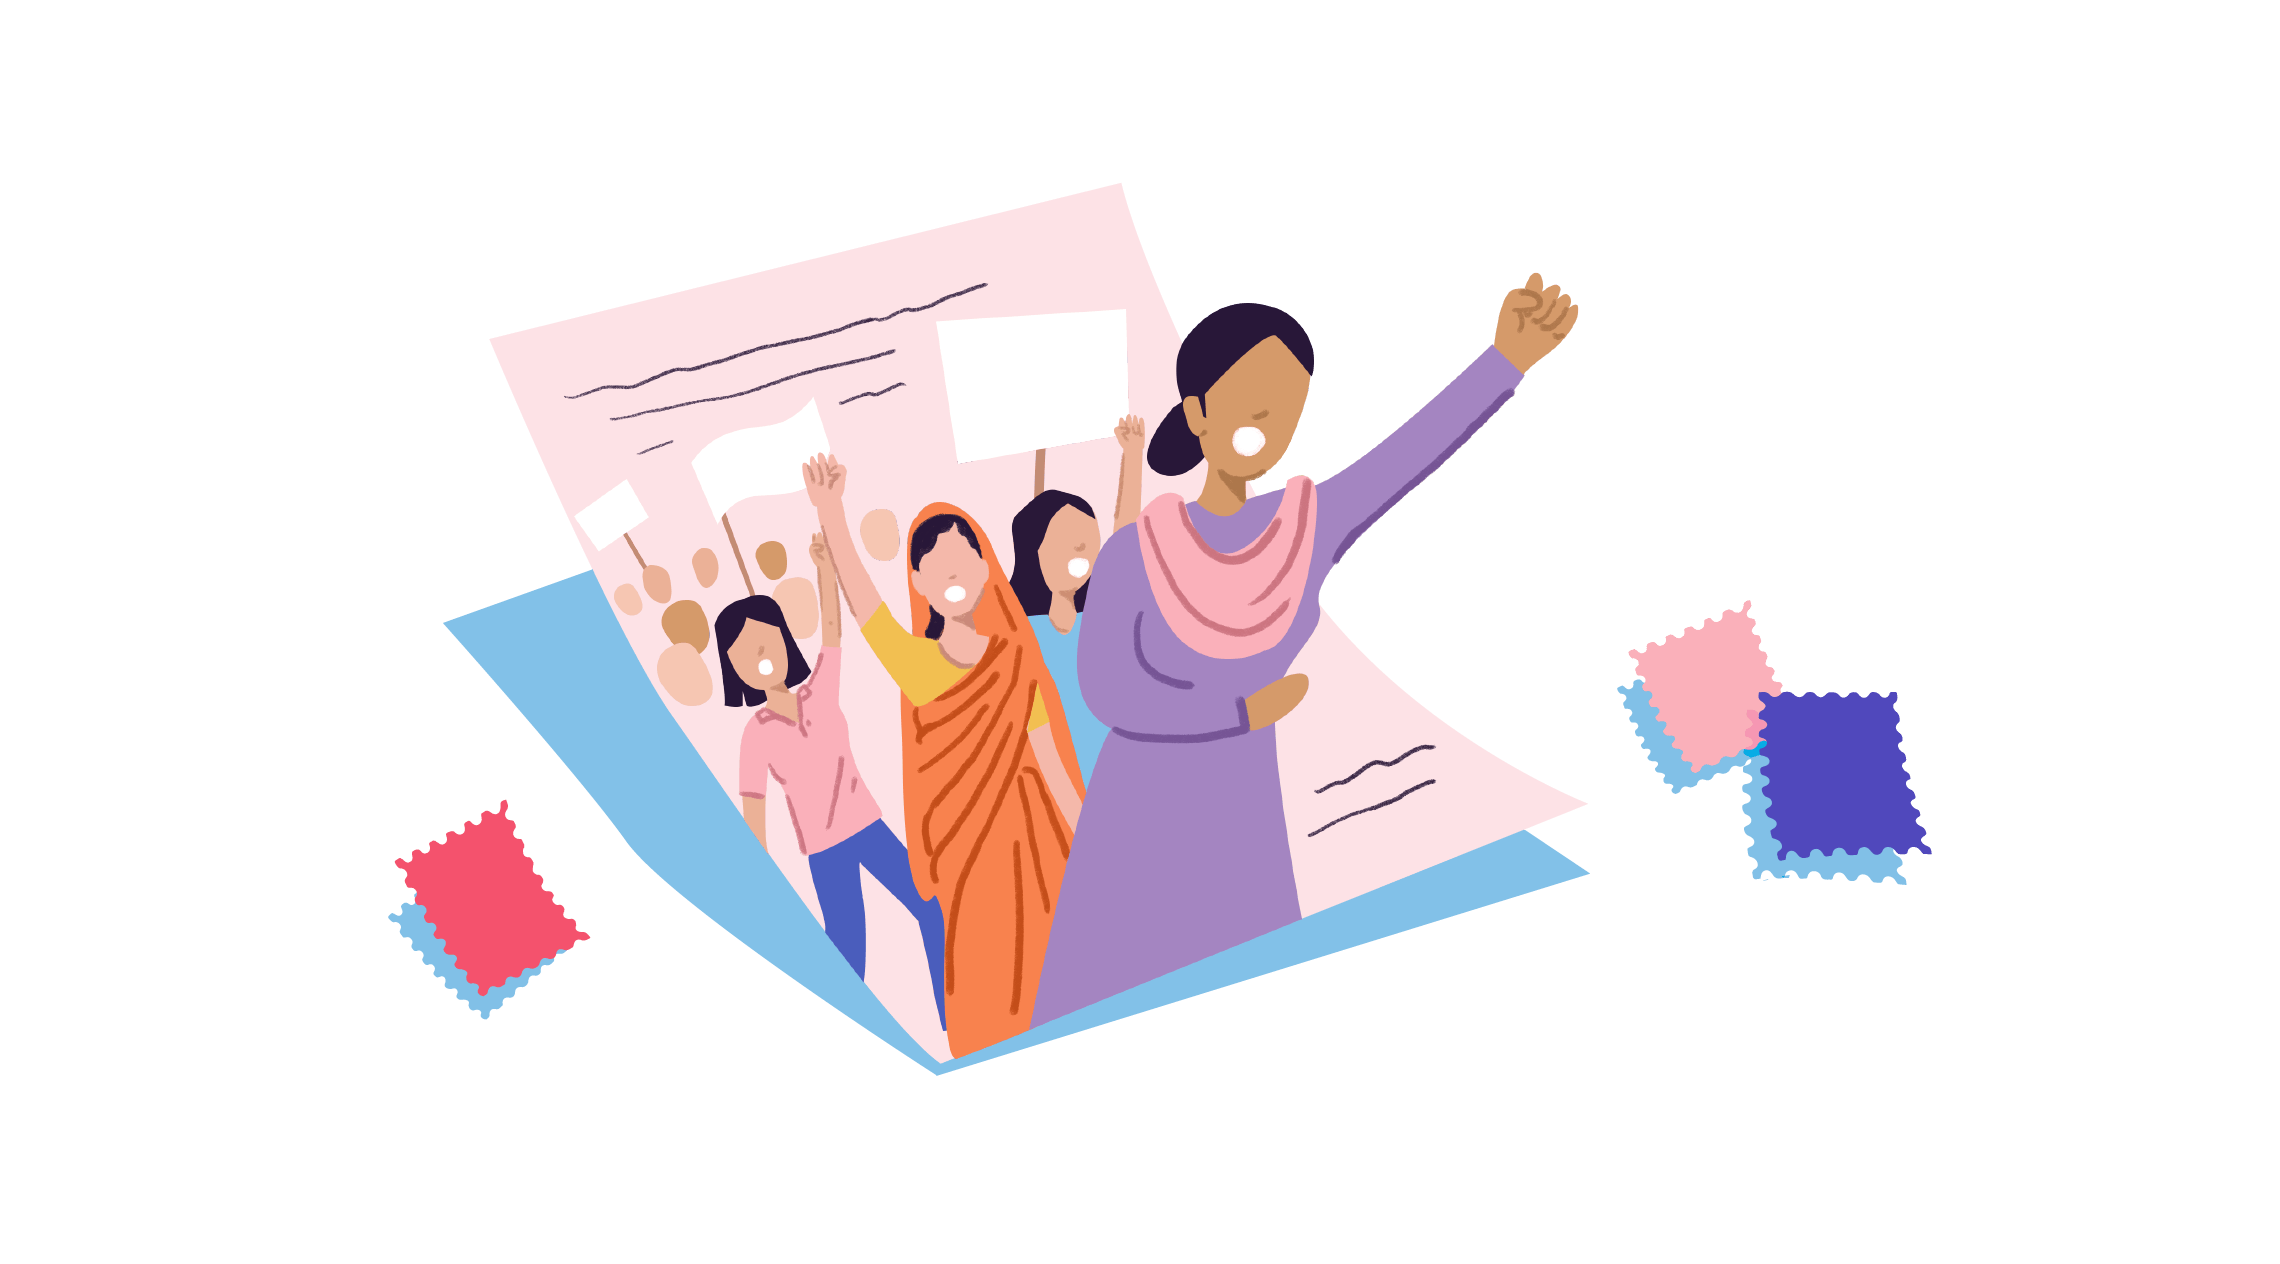 Power - An open letter to the Supreme Court changed the way many Indians thought about women’s rights. The rest should be history.